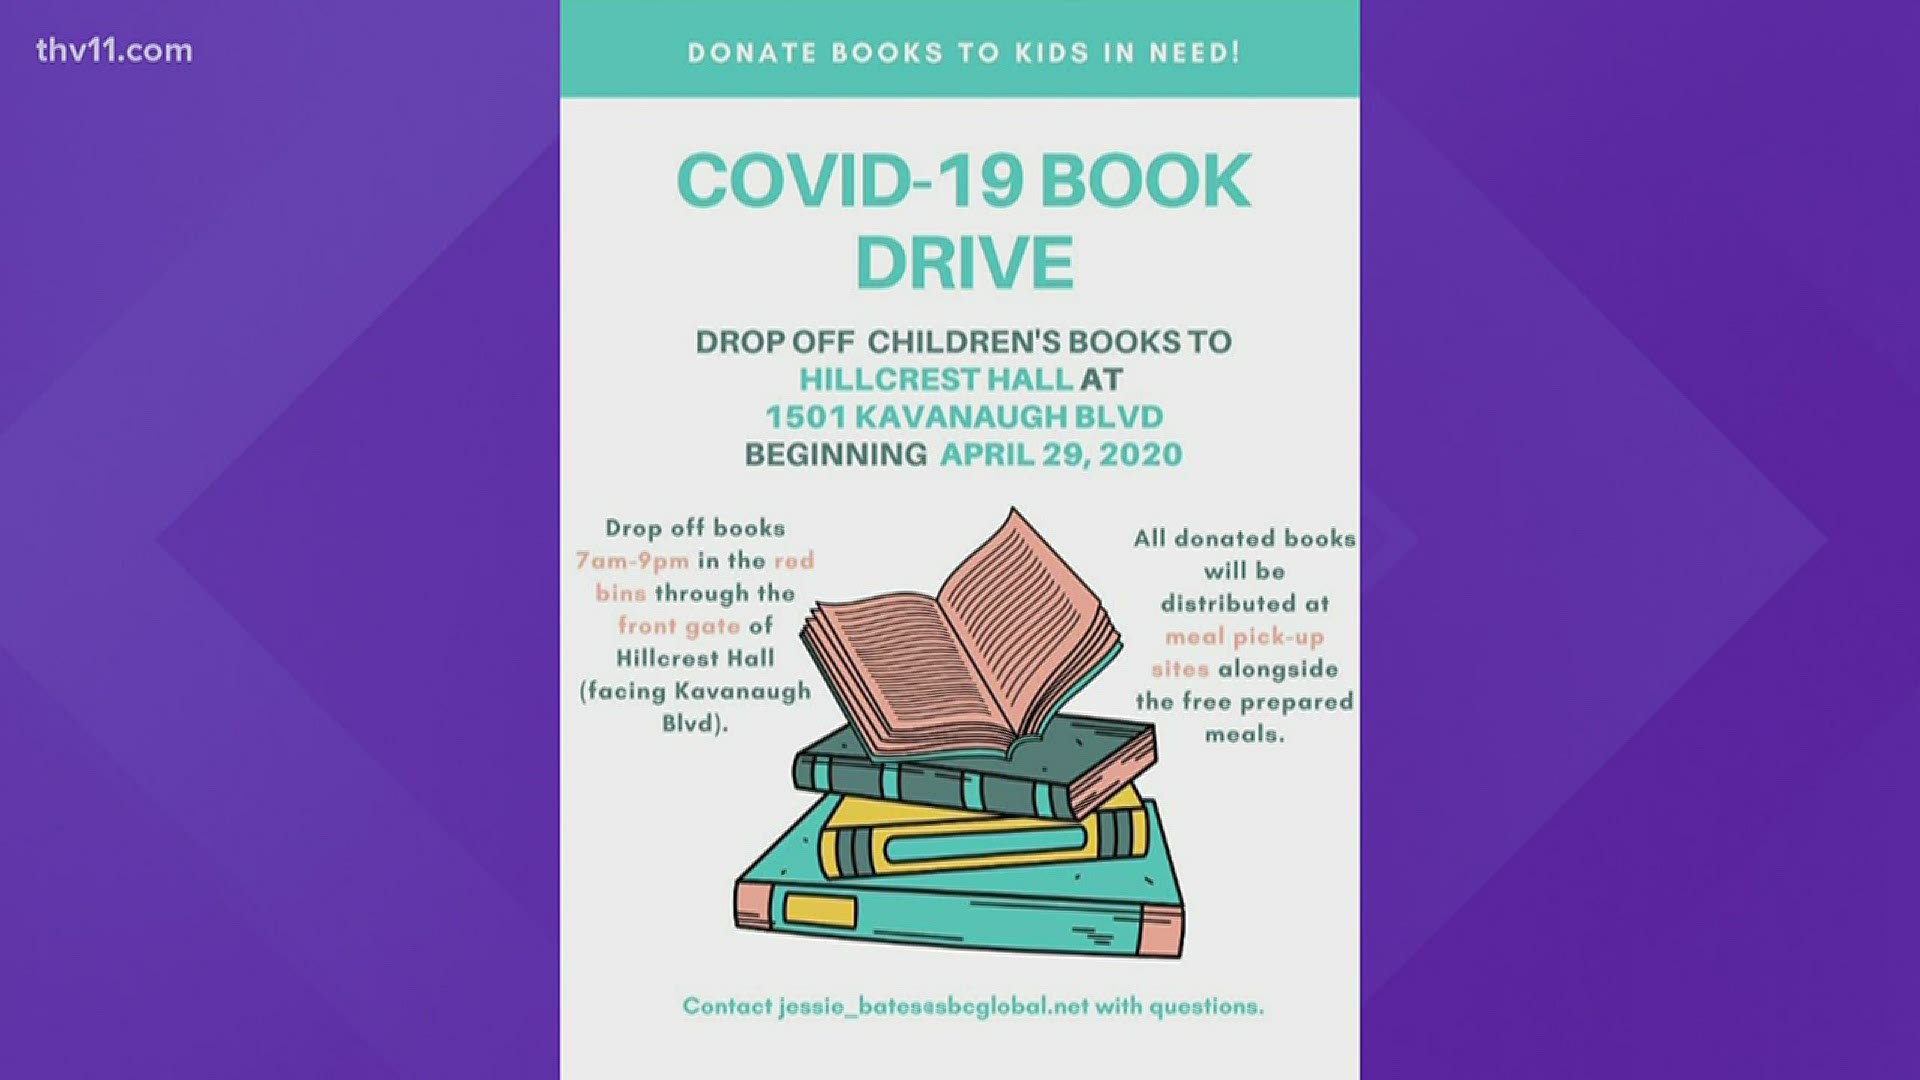 You have the chance to bring more books into the homes of central Arkansas students.